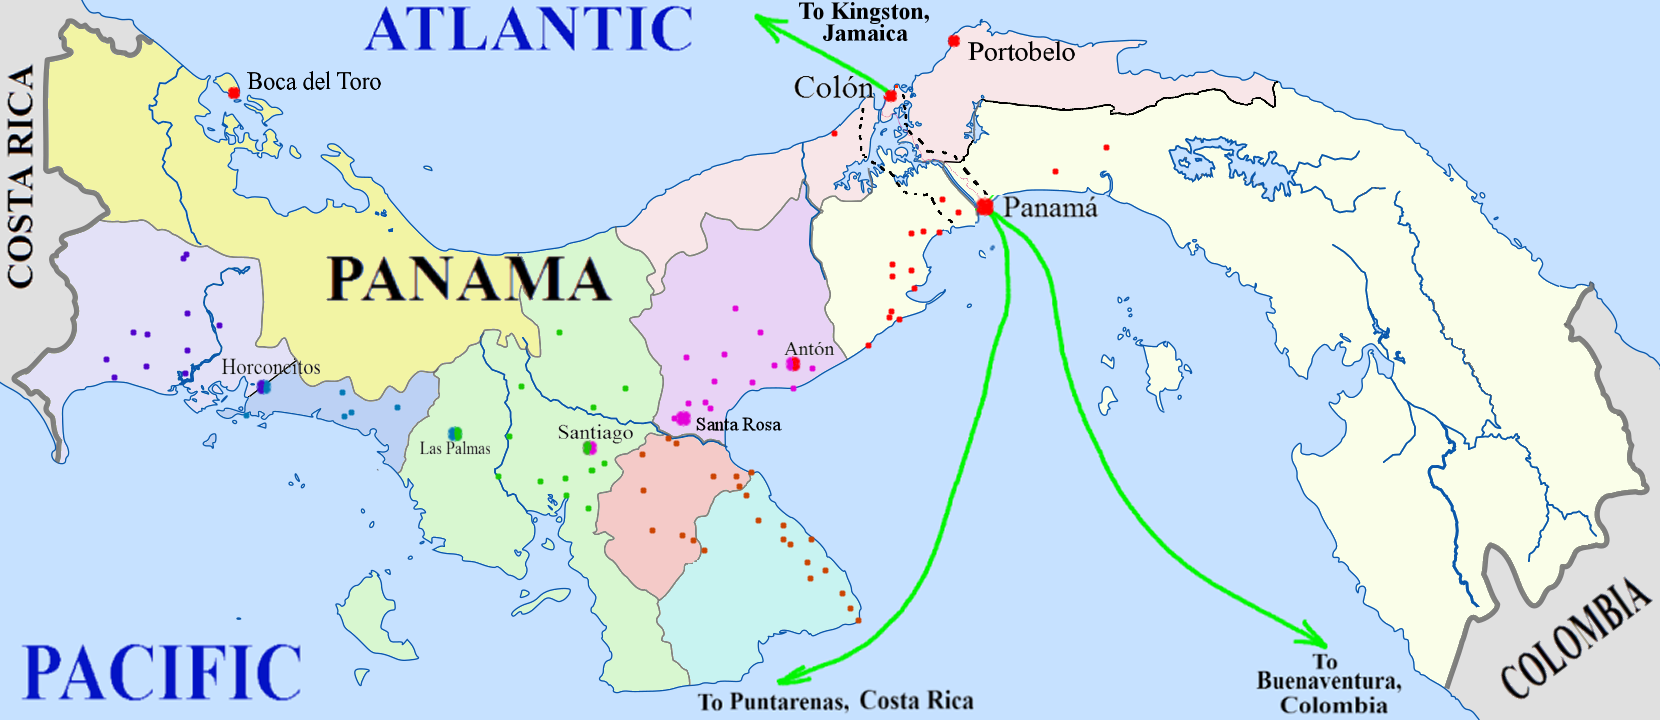 Panama-Map with Telephone stations